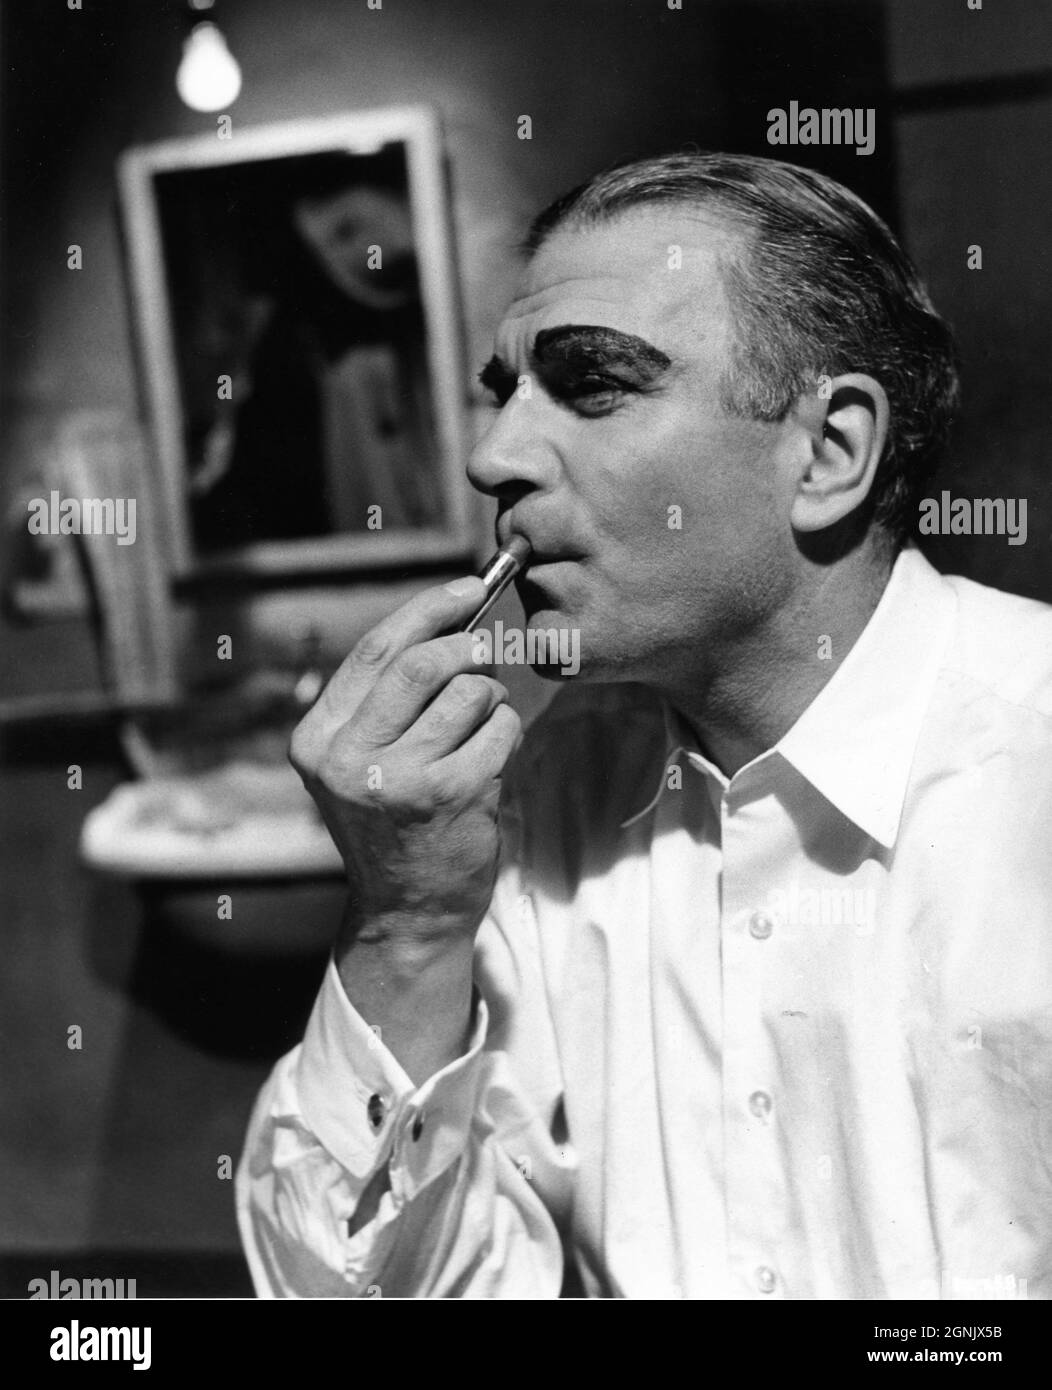 LAURENCE OLIVIER as Archie Rice putting his make-up on in his dressing room in THE ENTERTAINER 1960 director TONY RICHARDSON screenplay John Osborne and Nigel Kneale adapted from the play by John Osborne music John Addison producer Harry Saltzman Woodfall Film Productions / British Lion Films (UK) - Continental Distributing (US) Stock Photo